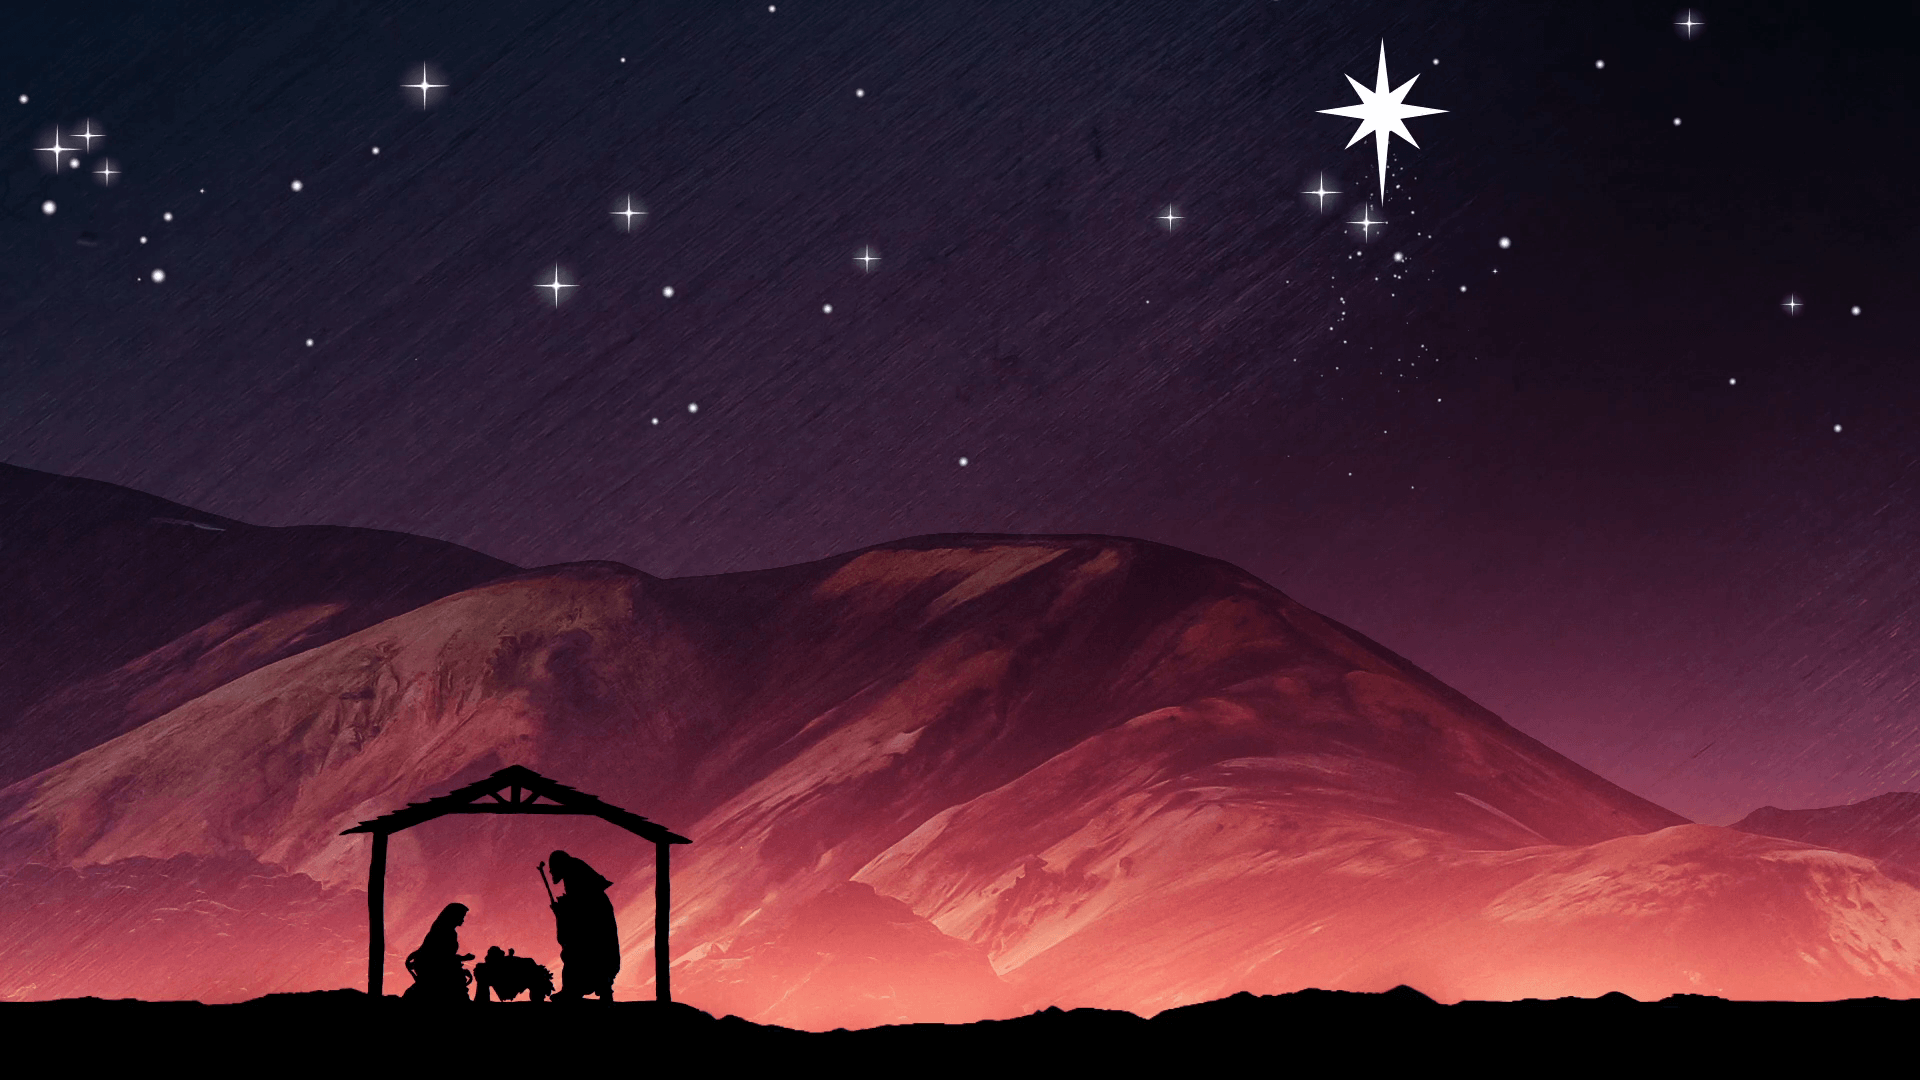 Christmas Nativity Background. Mary, Joseph And Baby Jesus In A